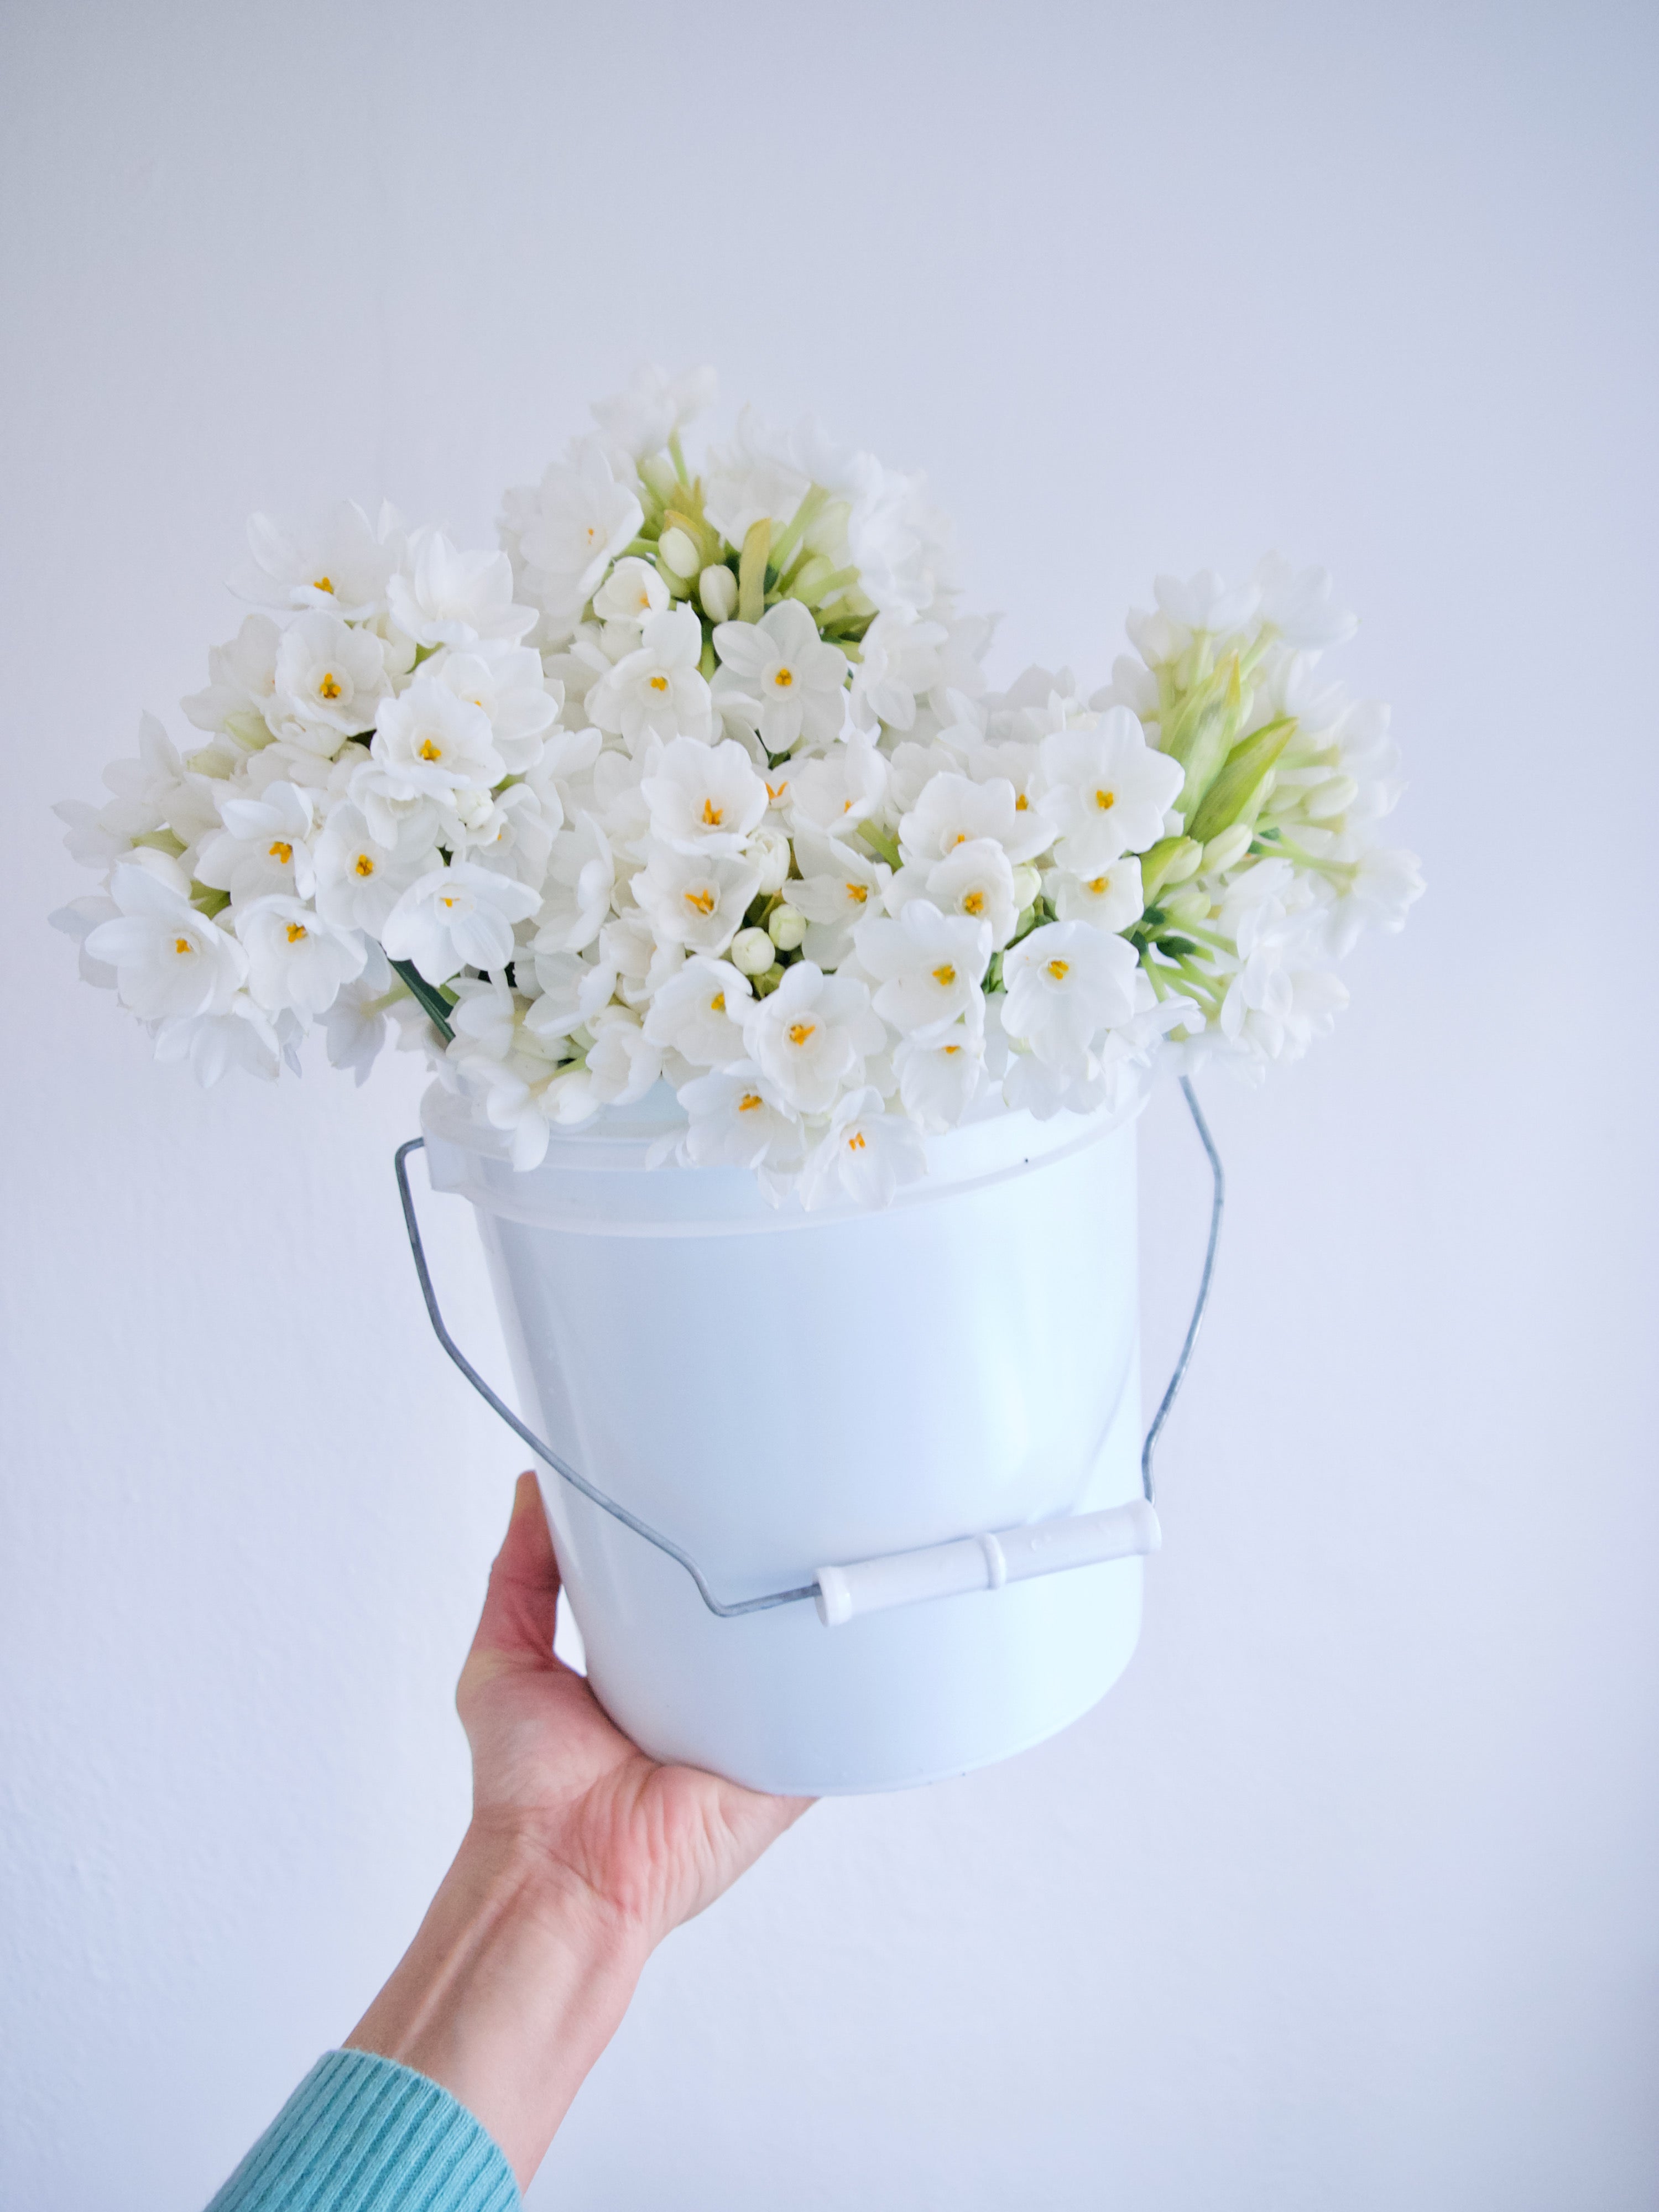 Paperwhites | Locally Grown Flowers | Vancouver Florists Delivery | Portland Florists Delivery | Send Flowers Online